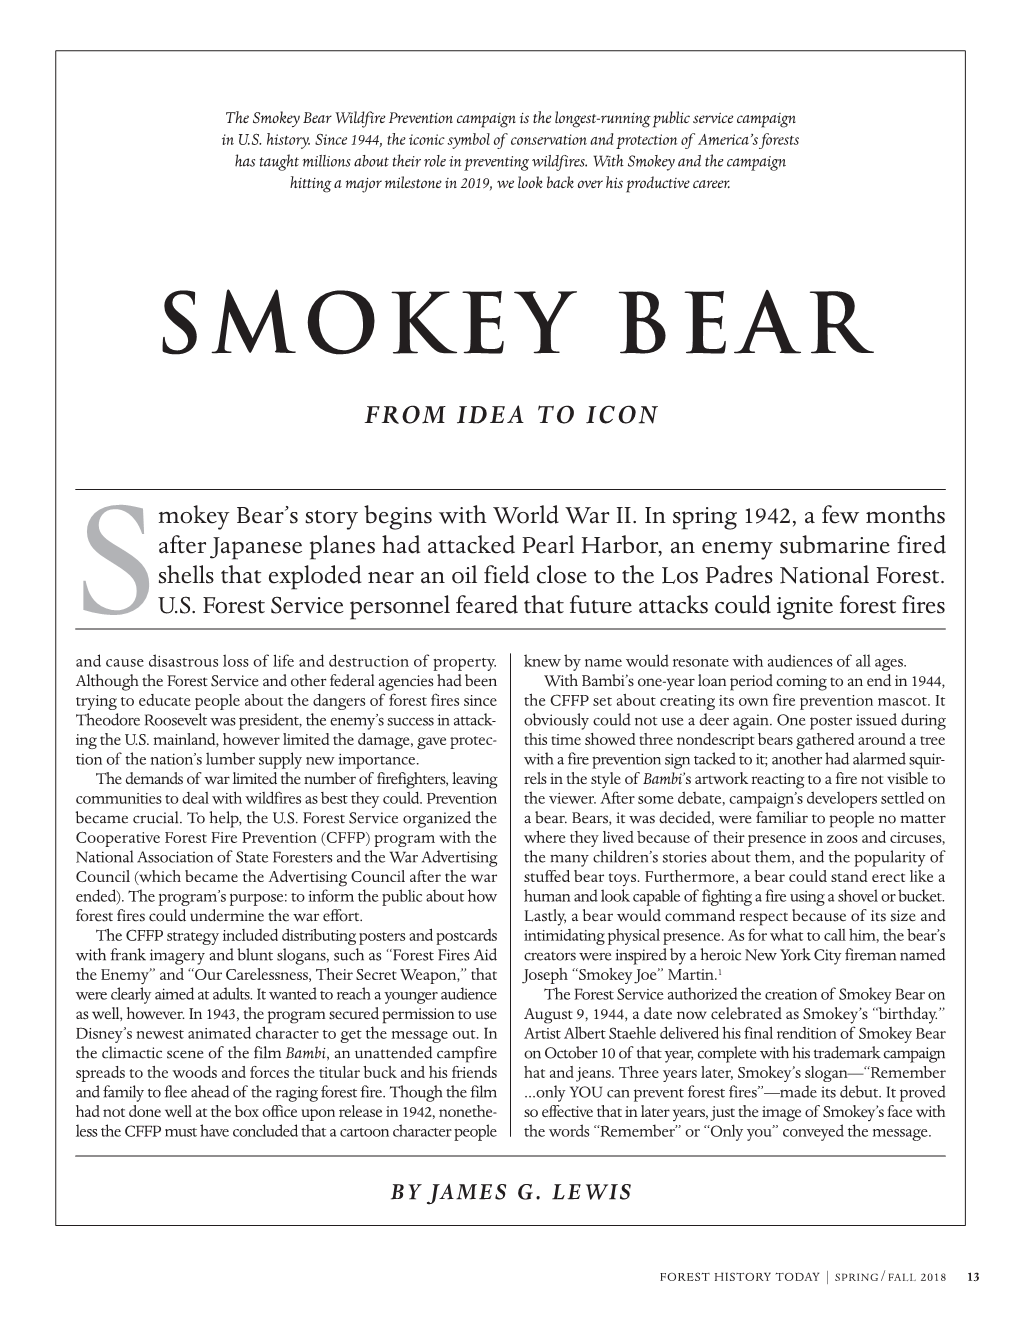 Smokey Bear Wildfire Prevention Campaign Is the Longest-Running Public Service Campaign in U.S